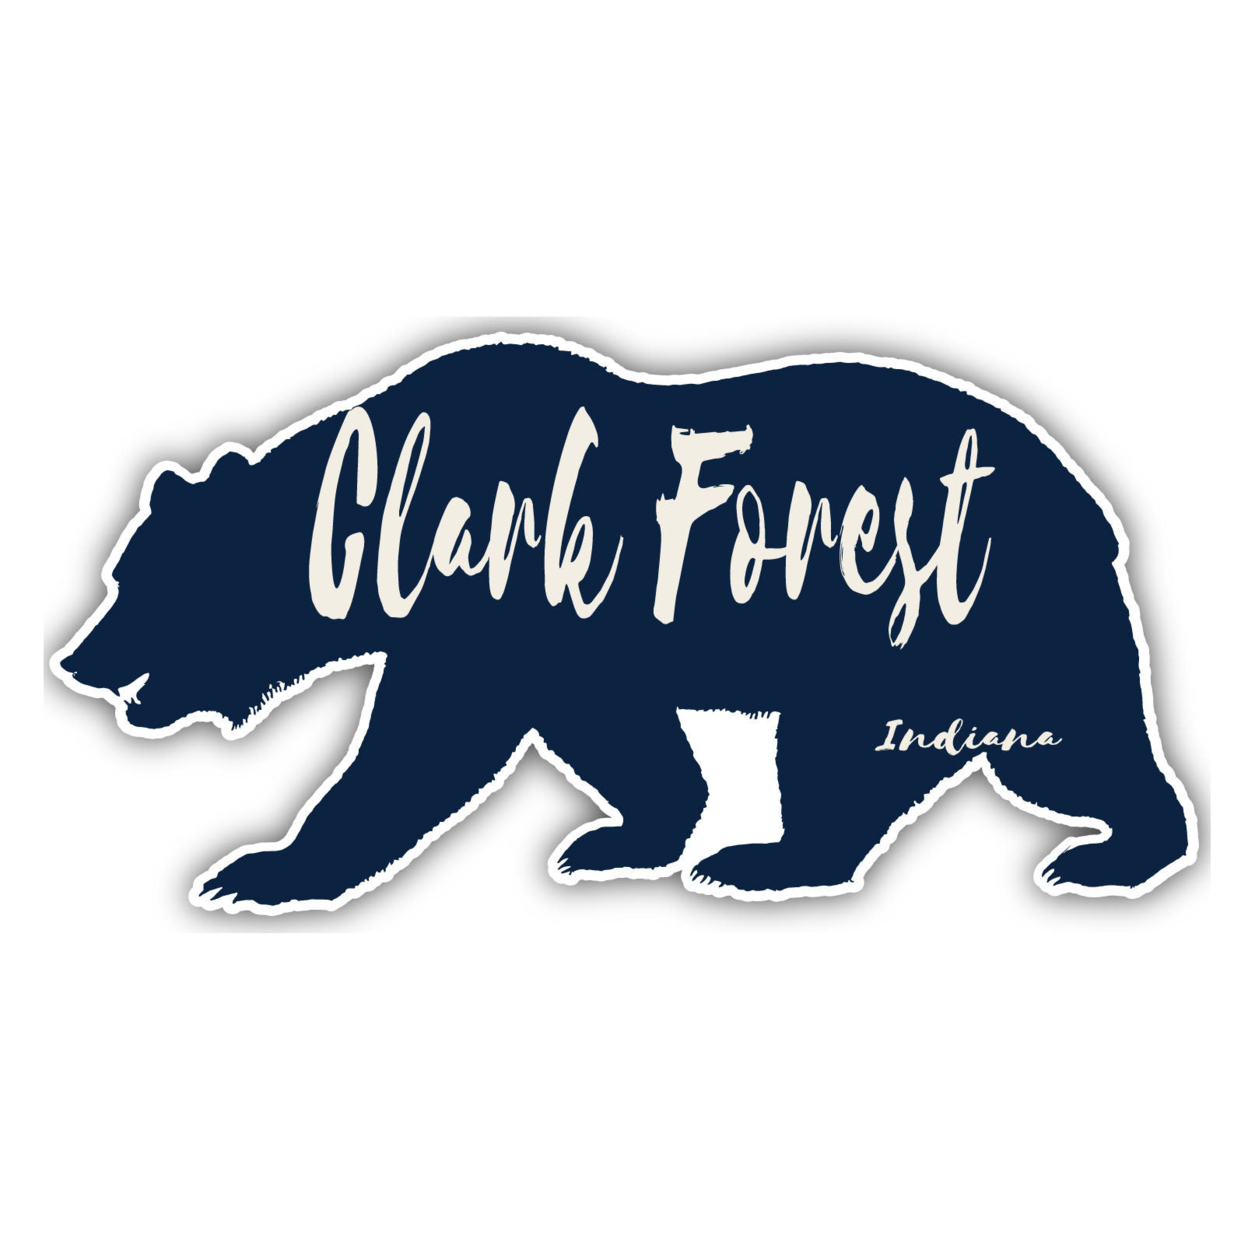 Clark Forest Indiana Souvenir Decorative Stickers (Choose Theme And Size) - 4-Pack, 6-Inch, Bear